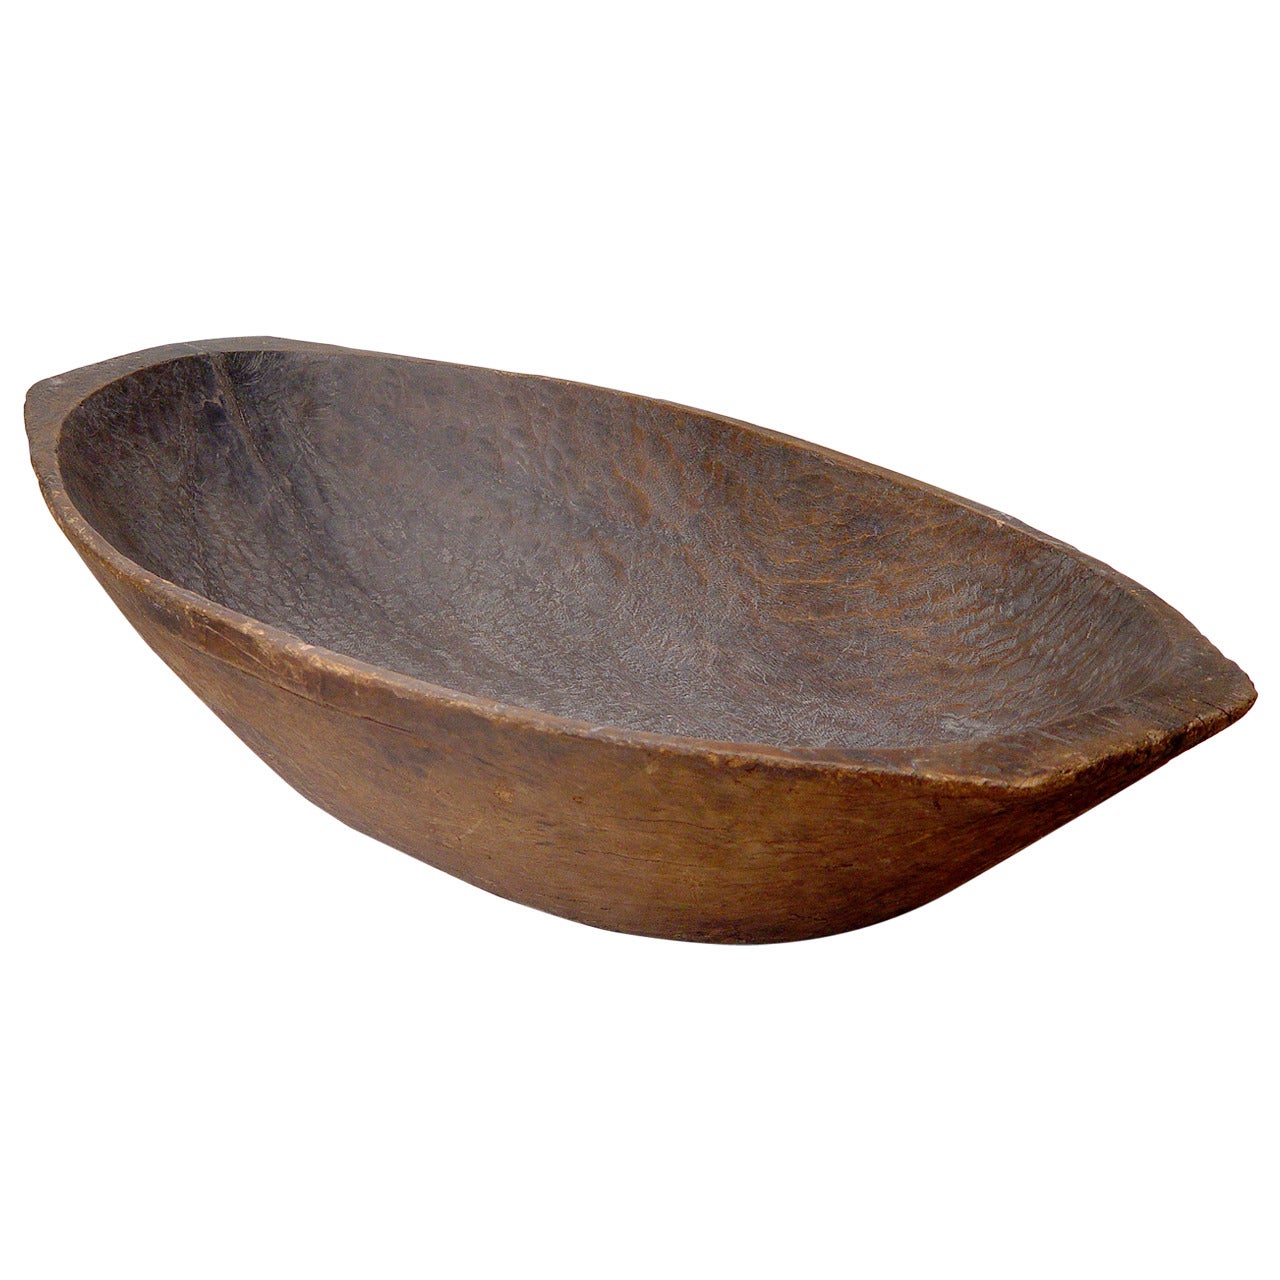 Large Hand-Carved Wooden Bowl, Made Out of a Solid Piece of Wood, circa 1920 For Sale